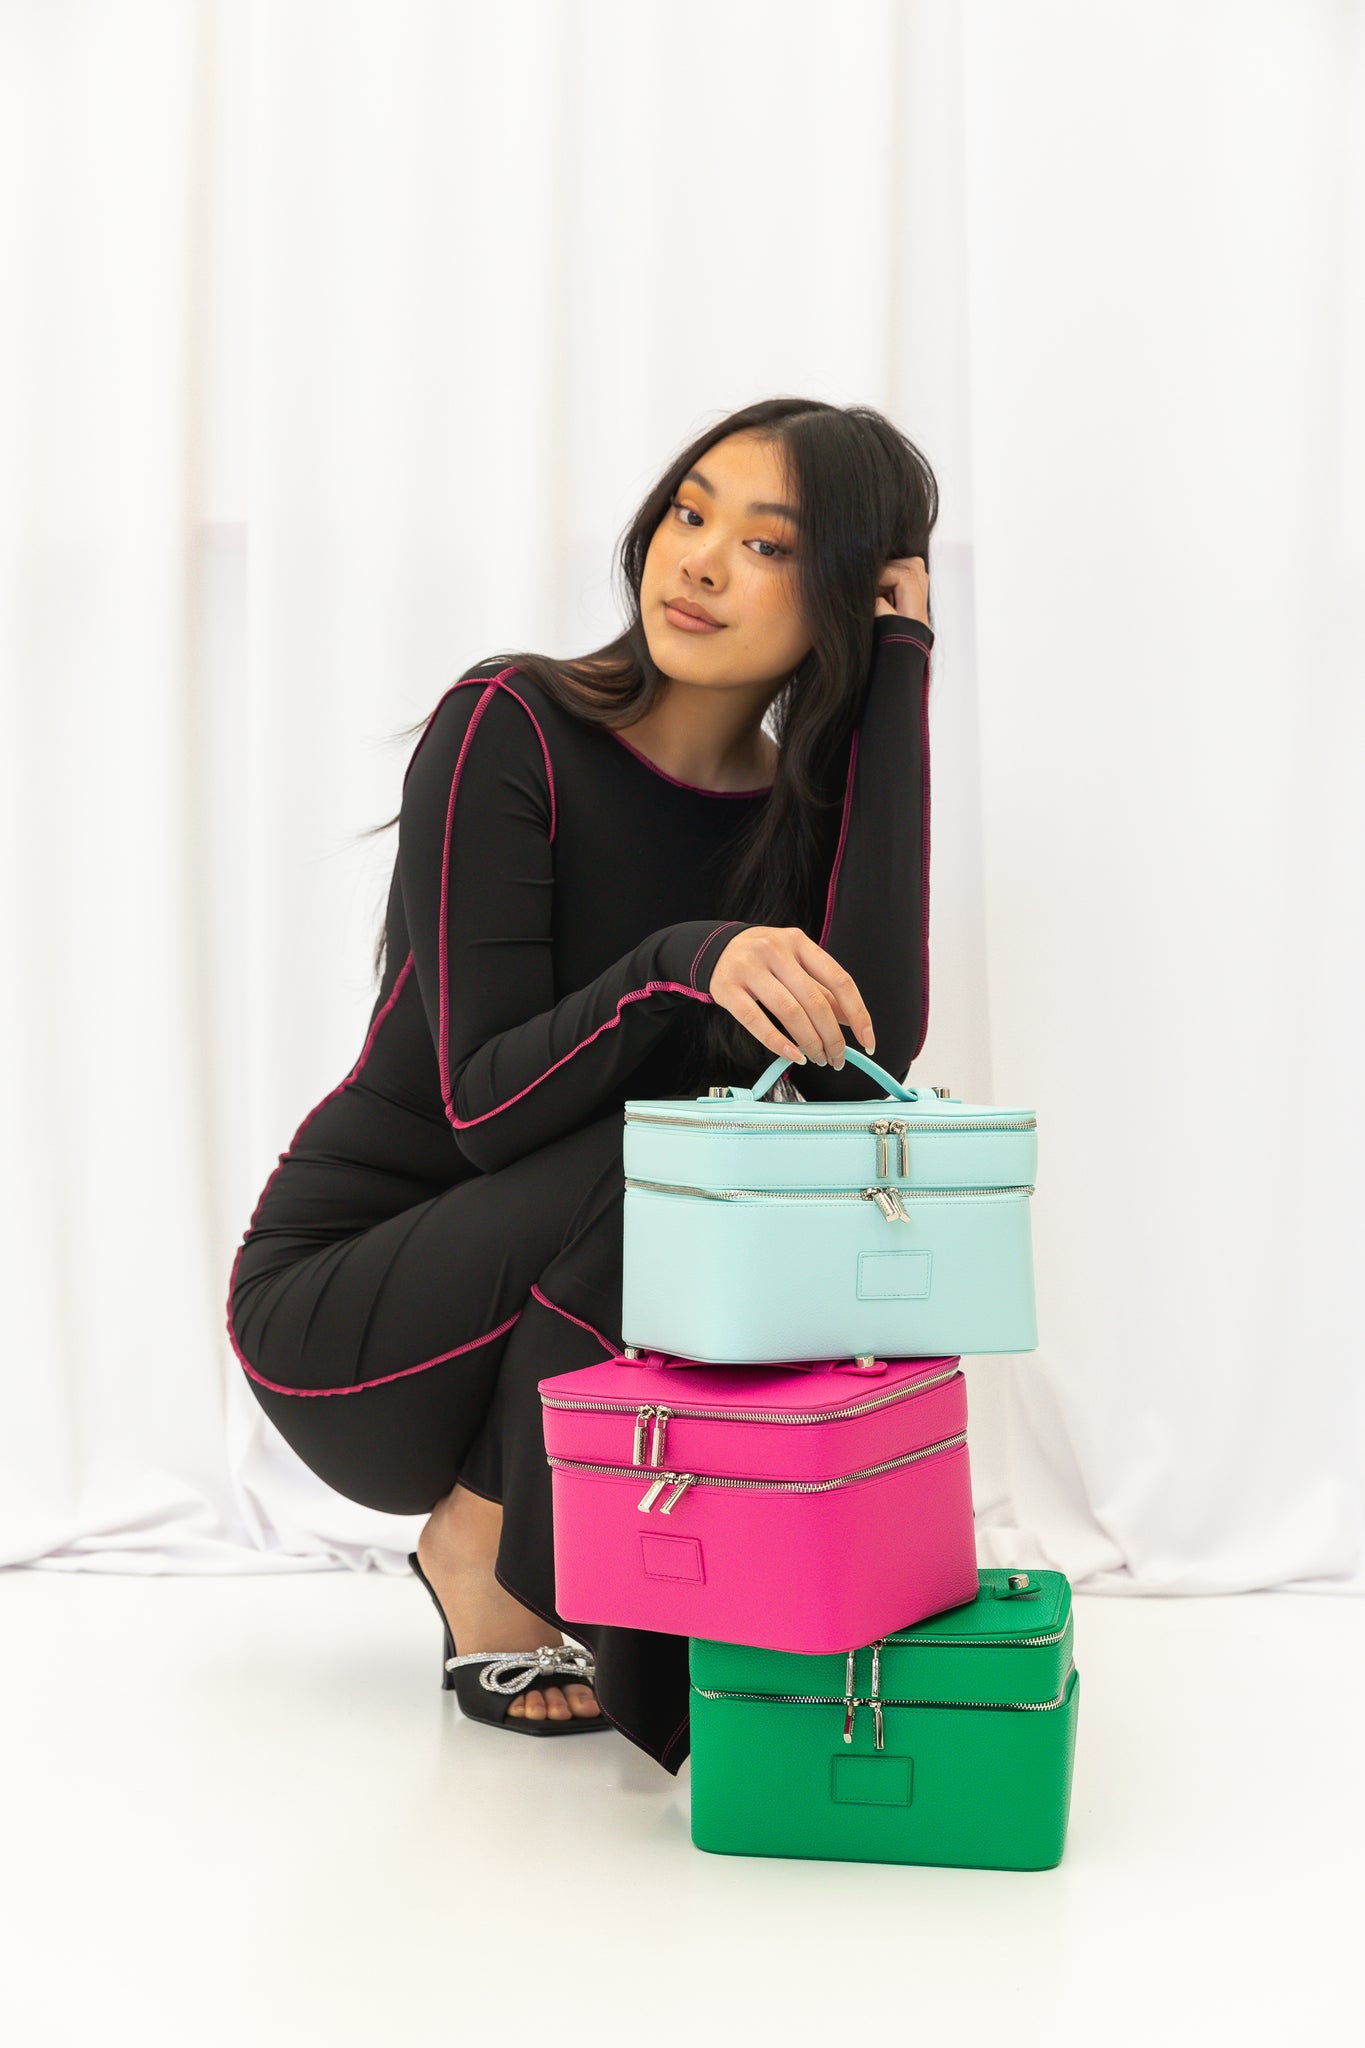 Duo Vanity Case in Limited Edition Colours: Powder Blue, Barbie Pink, and Kelly Green.